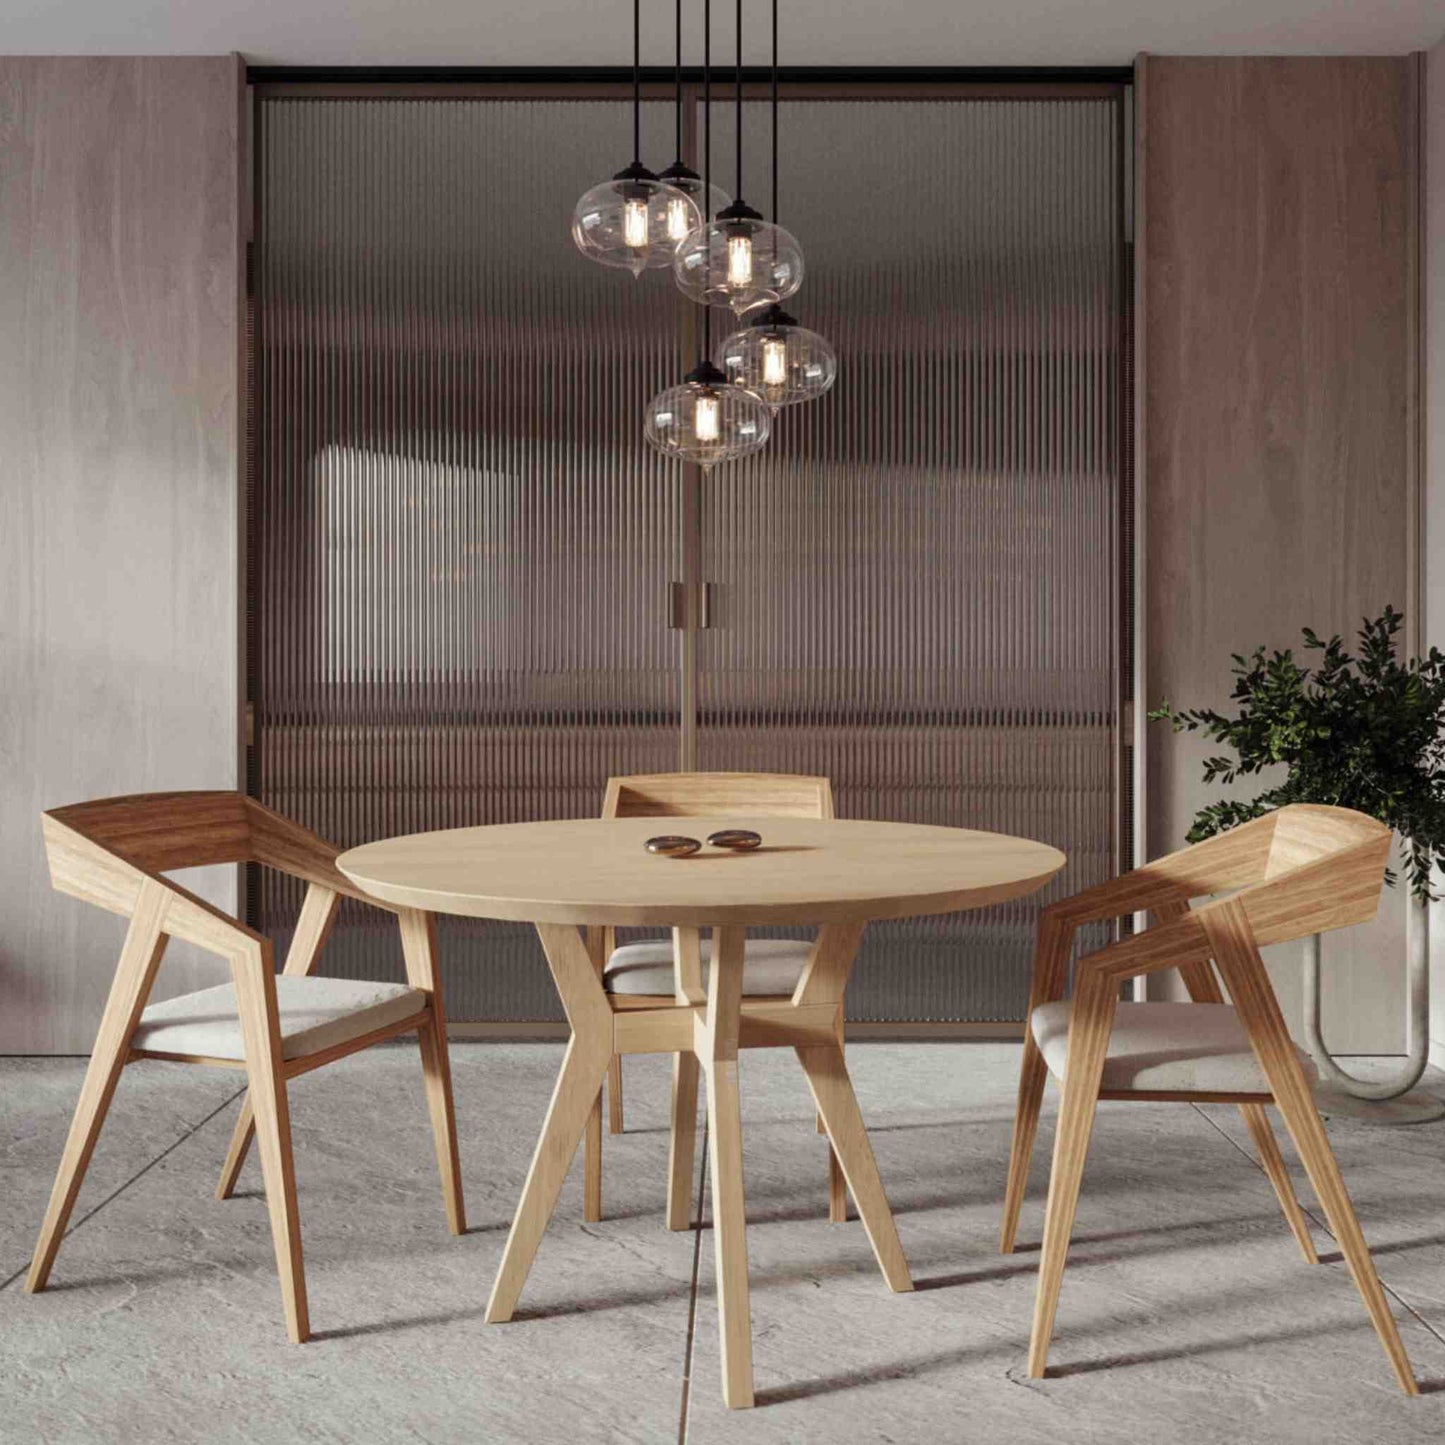 Interior arrangement with the Lyskamm Round Dining Table in Solid Oak Wood